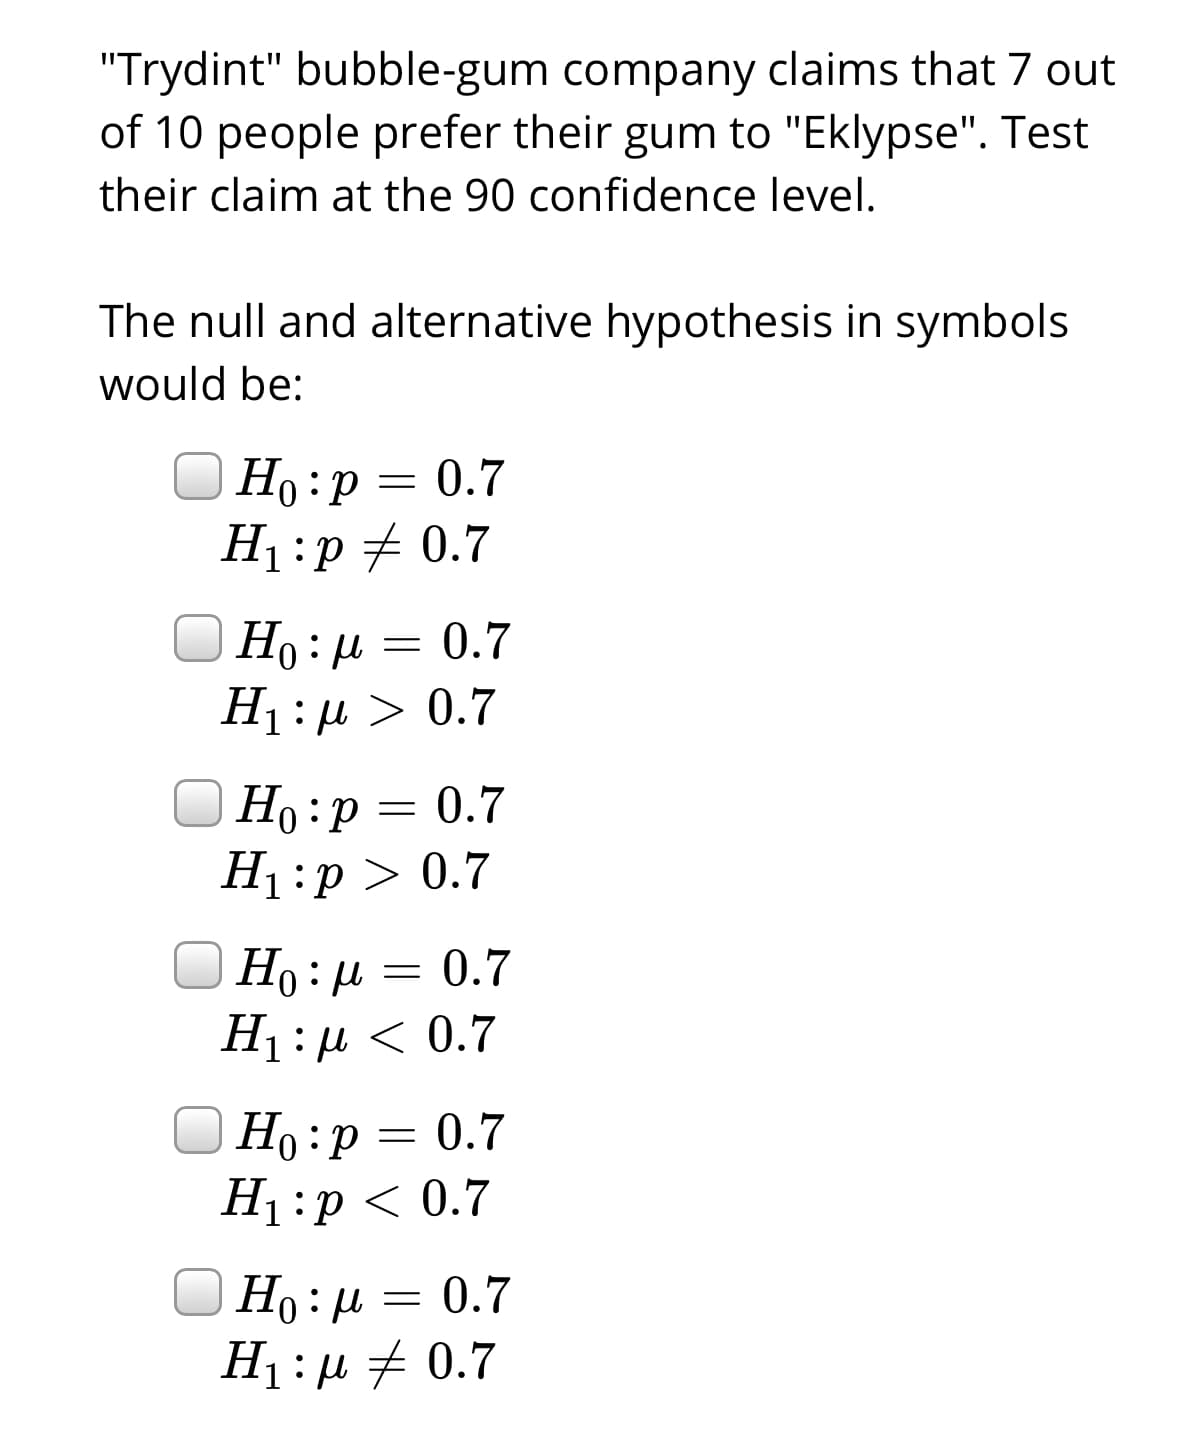 "Trydint" bubble-gum company claims that 7 out
of 10 people prefer their gum to "Eklypse". Test
their claim at the 90 confidence level.
The null and alternative hypothesis in symbols
would be:
Но : р — 0.7
H1:p + 0.7
Но: д 3 0.7
H1:µ > 0.7
Ho: U
|Ho:p = 0.7
H1:p > 0.7
Но р
|Ho:µ = 0.7
Ні:д < 0.7
Но:
Но :р 3 0.7
H1 :p < 0.7
| Ho:µ = 0.7
H1:µ + 0.7
